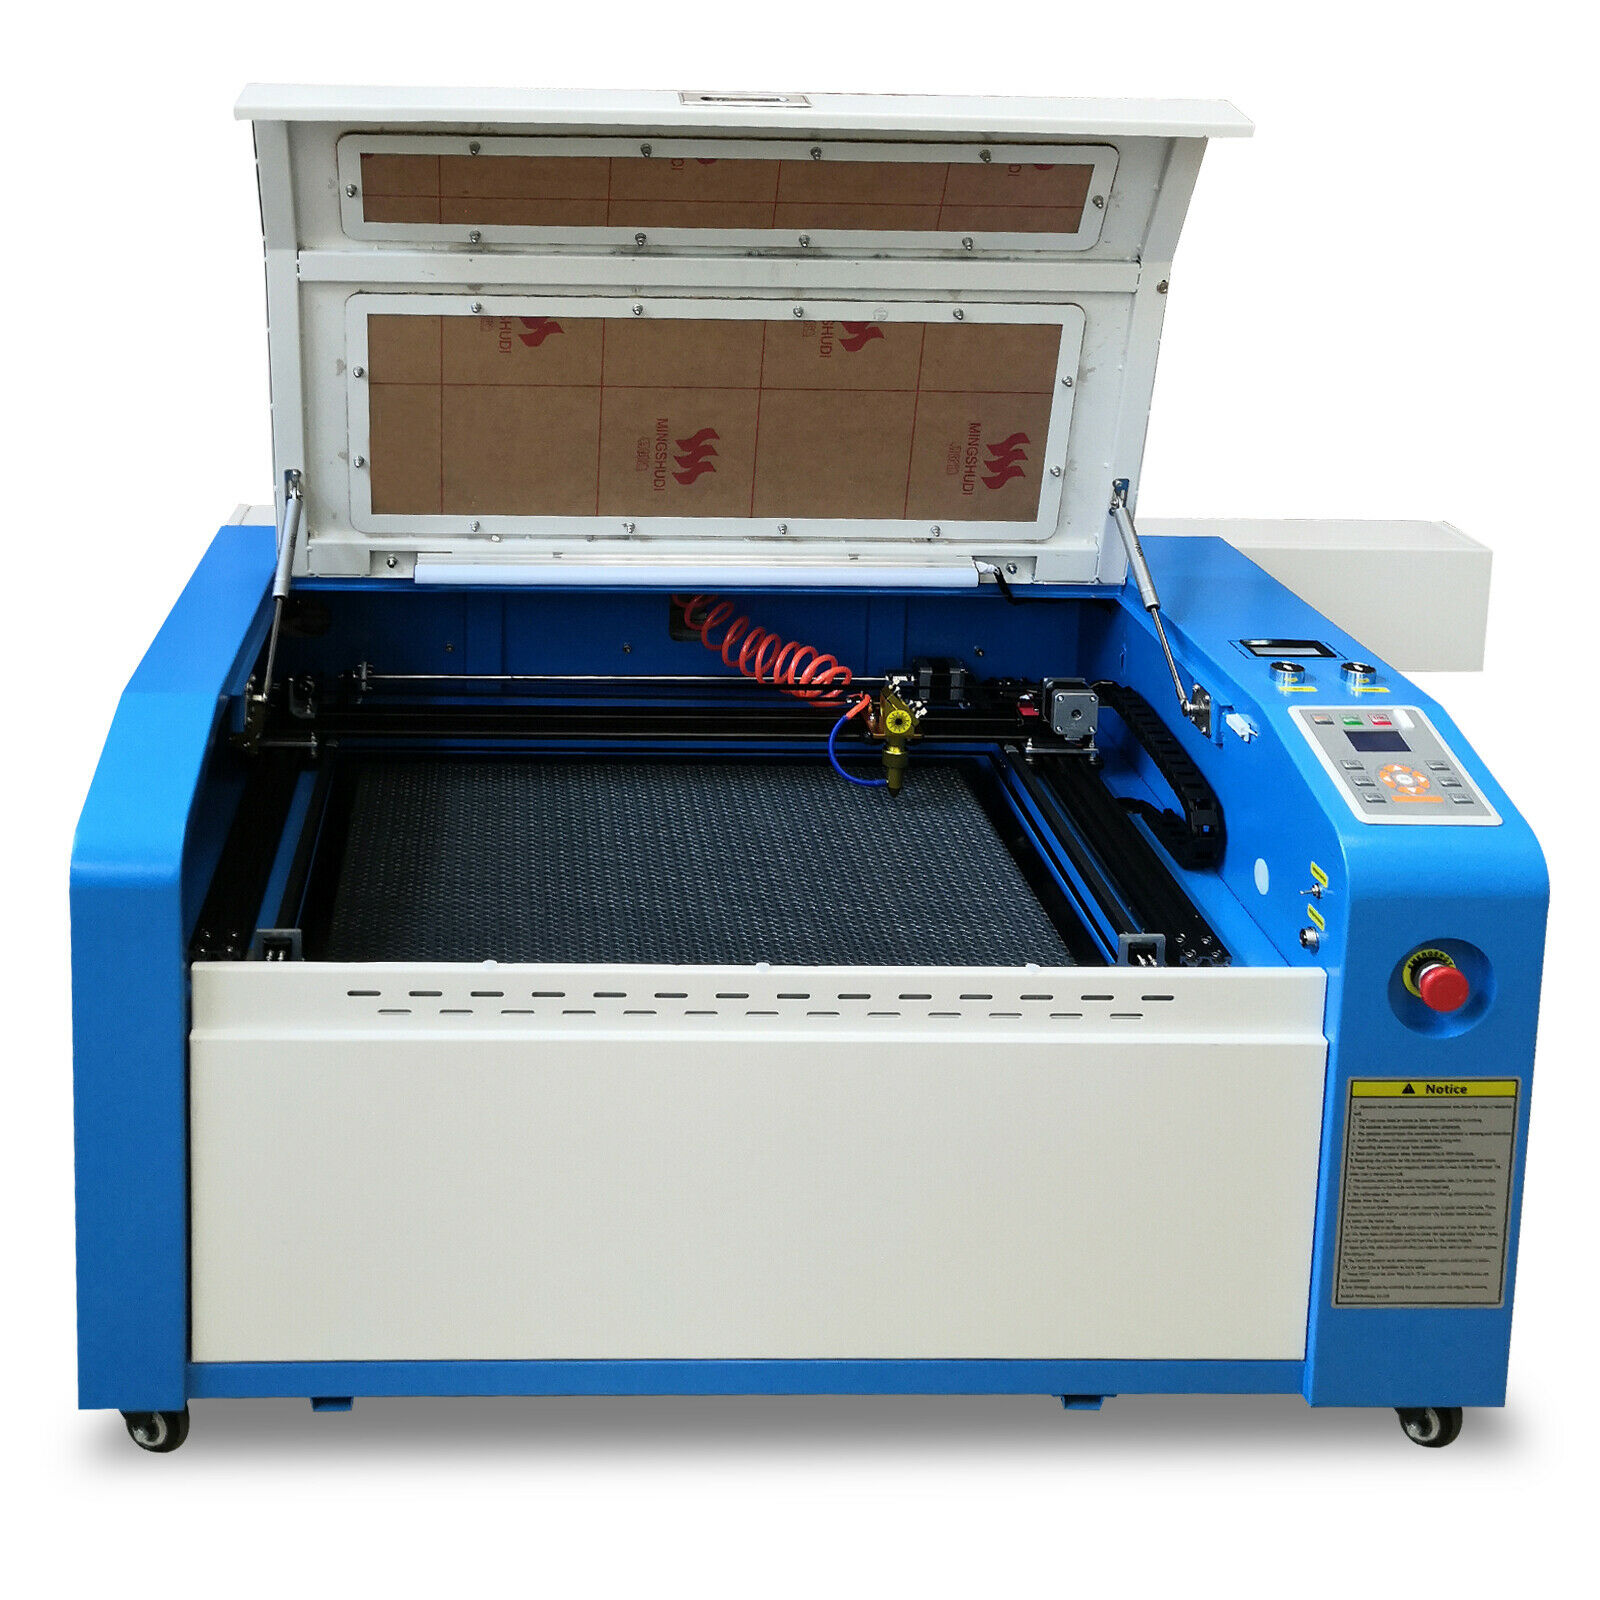 Autolaser A1 Board Honeycomb 60w Co2 Laser Engraving Cutting Machine 400*600mm